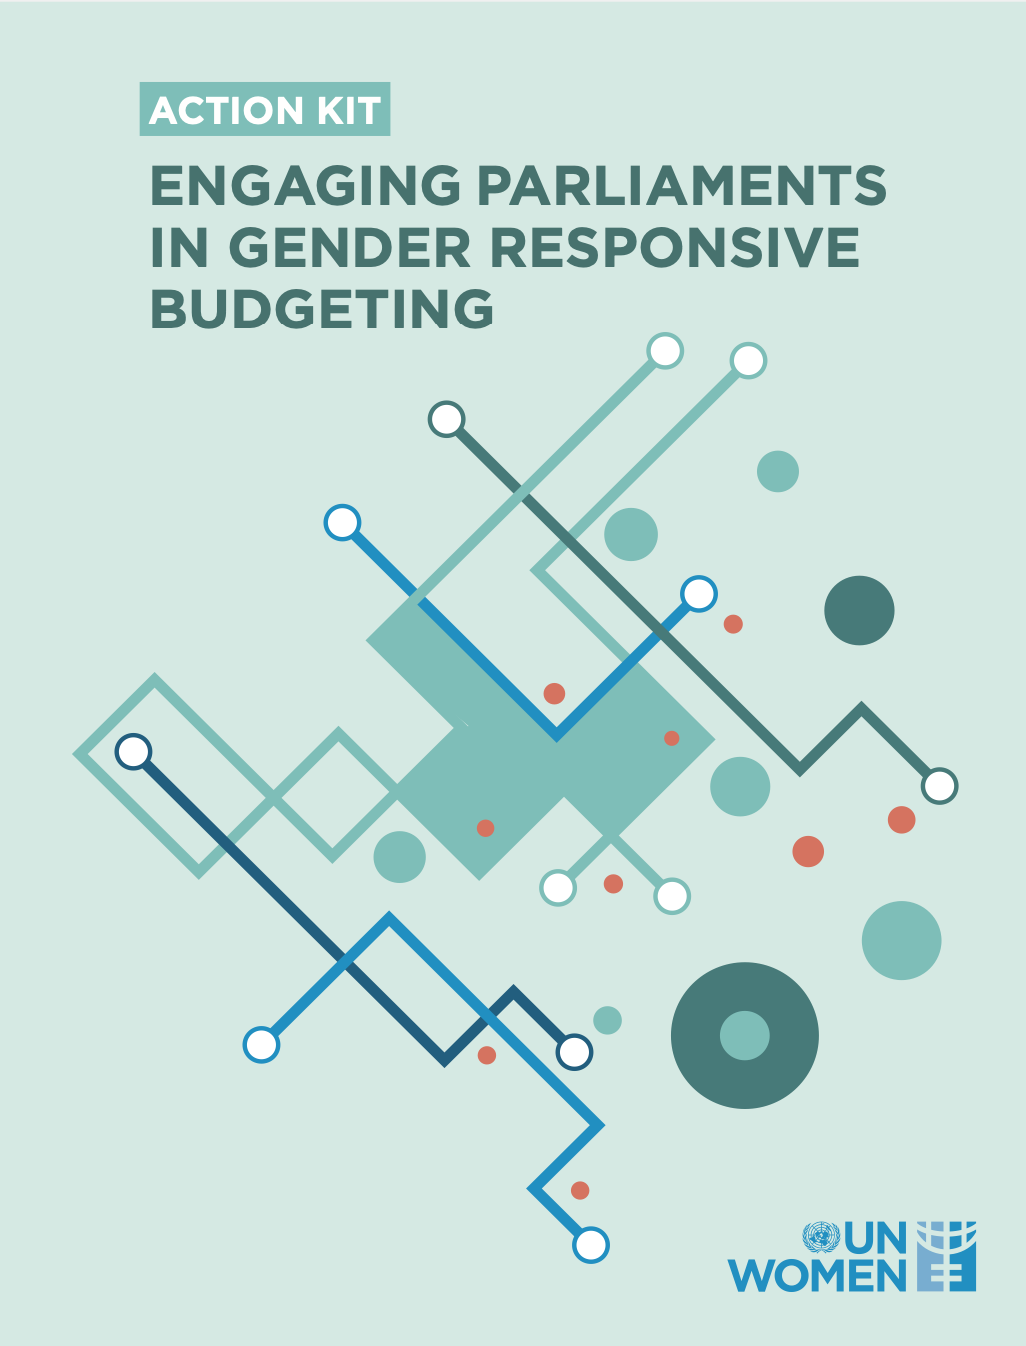 Action kit: Engaging parliaments in gender responsive budgeting